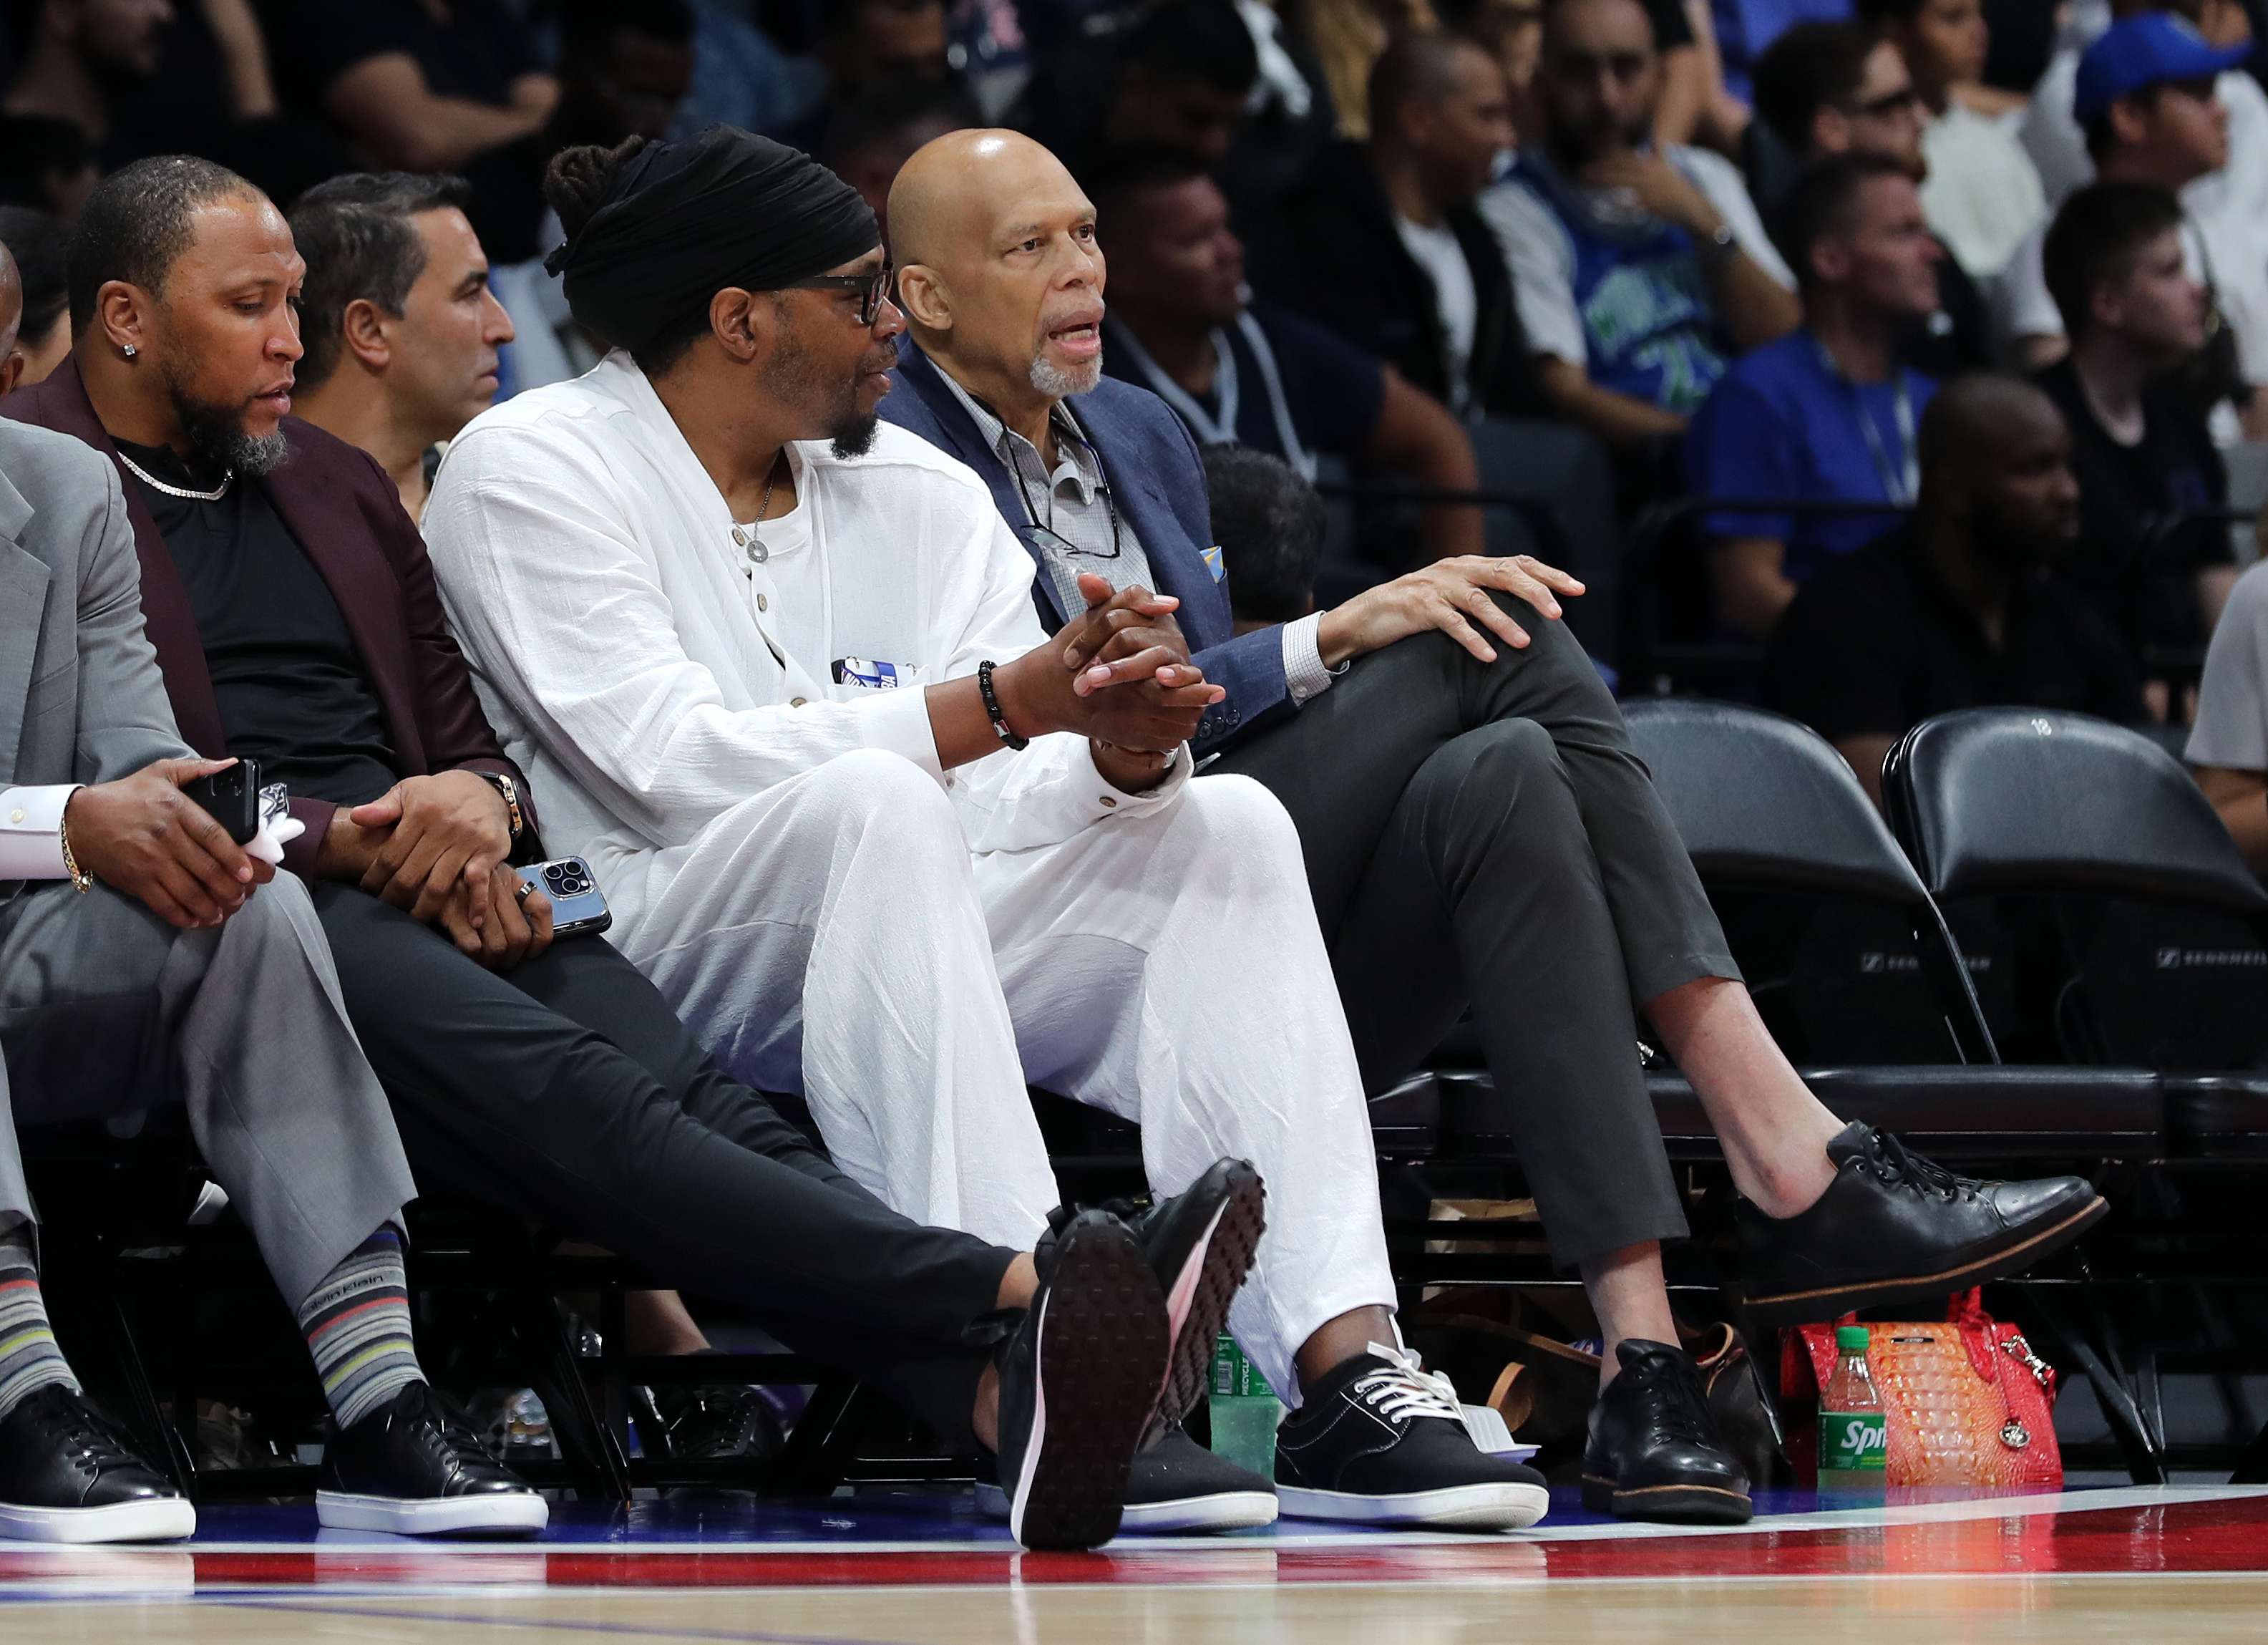 All the celebrities seen courtside during the NBA Abu Dhabi Games